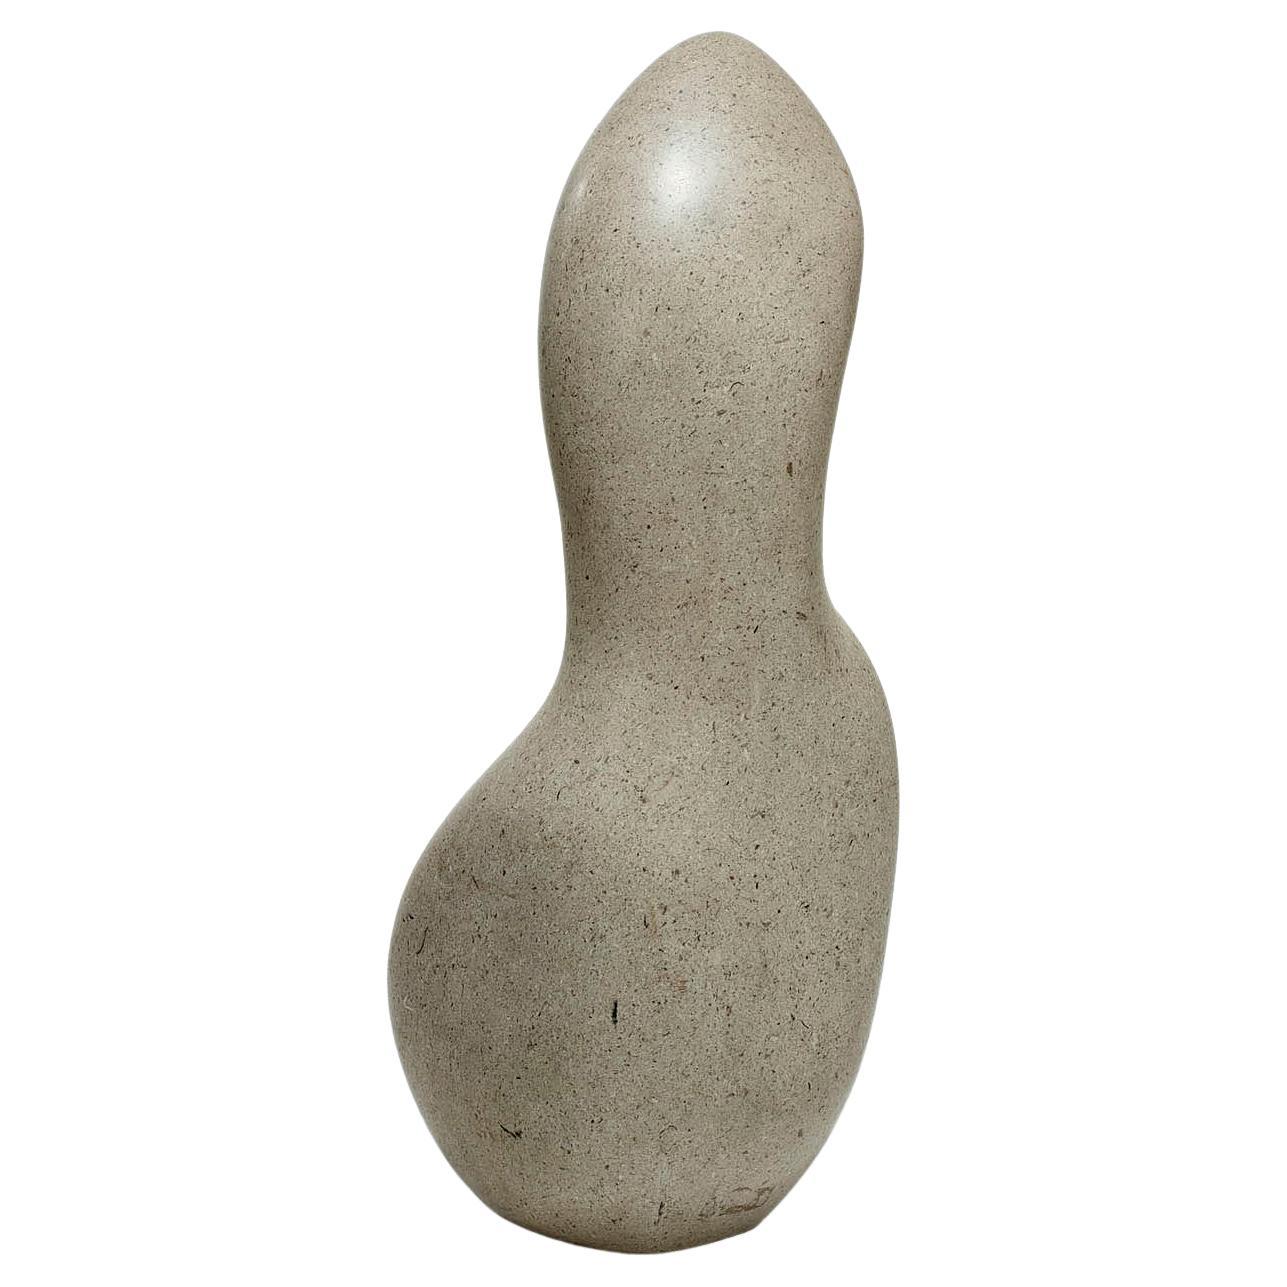 Well sized granite abstract sculpture of a female form very much in the vein of the work of Dame Barbara Hepworth. It is unsigned but is clearly the work of a very accomplished sculptor. Its smooth form is very tactile and as can be seen, when